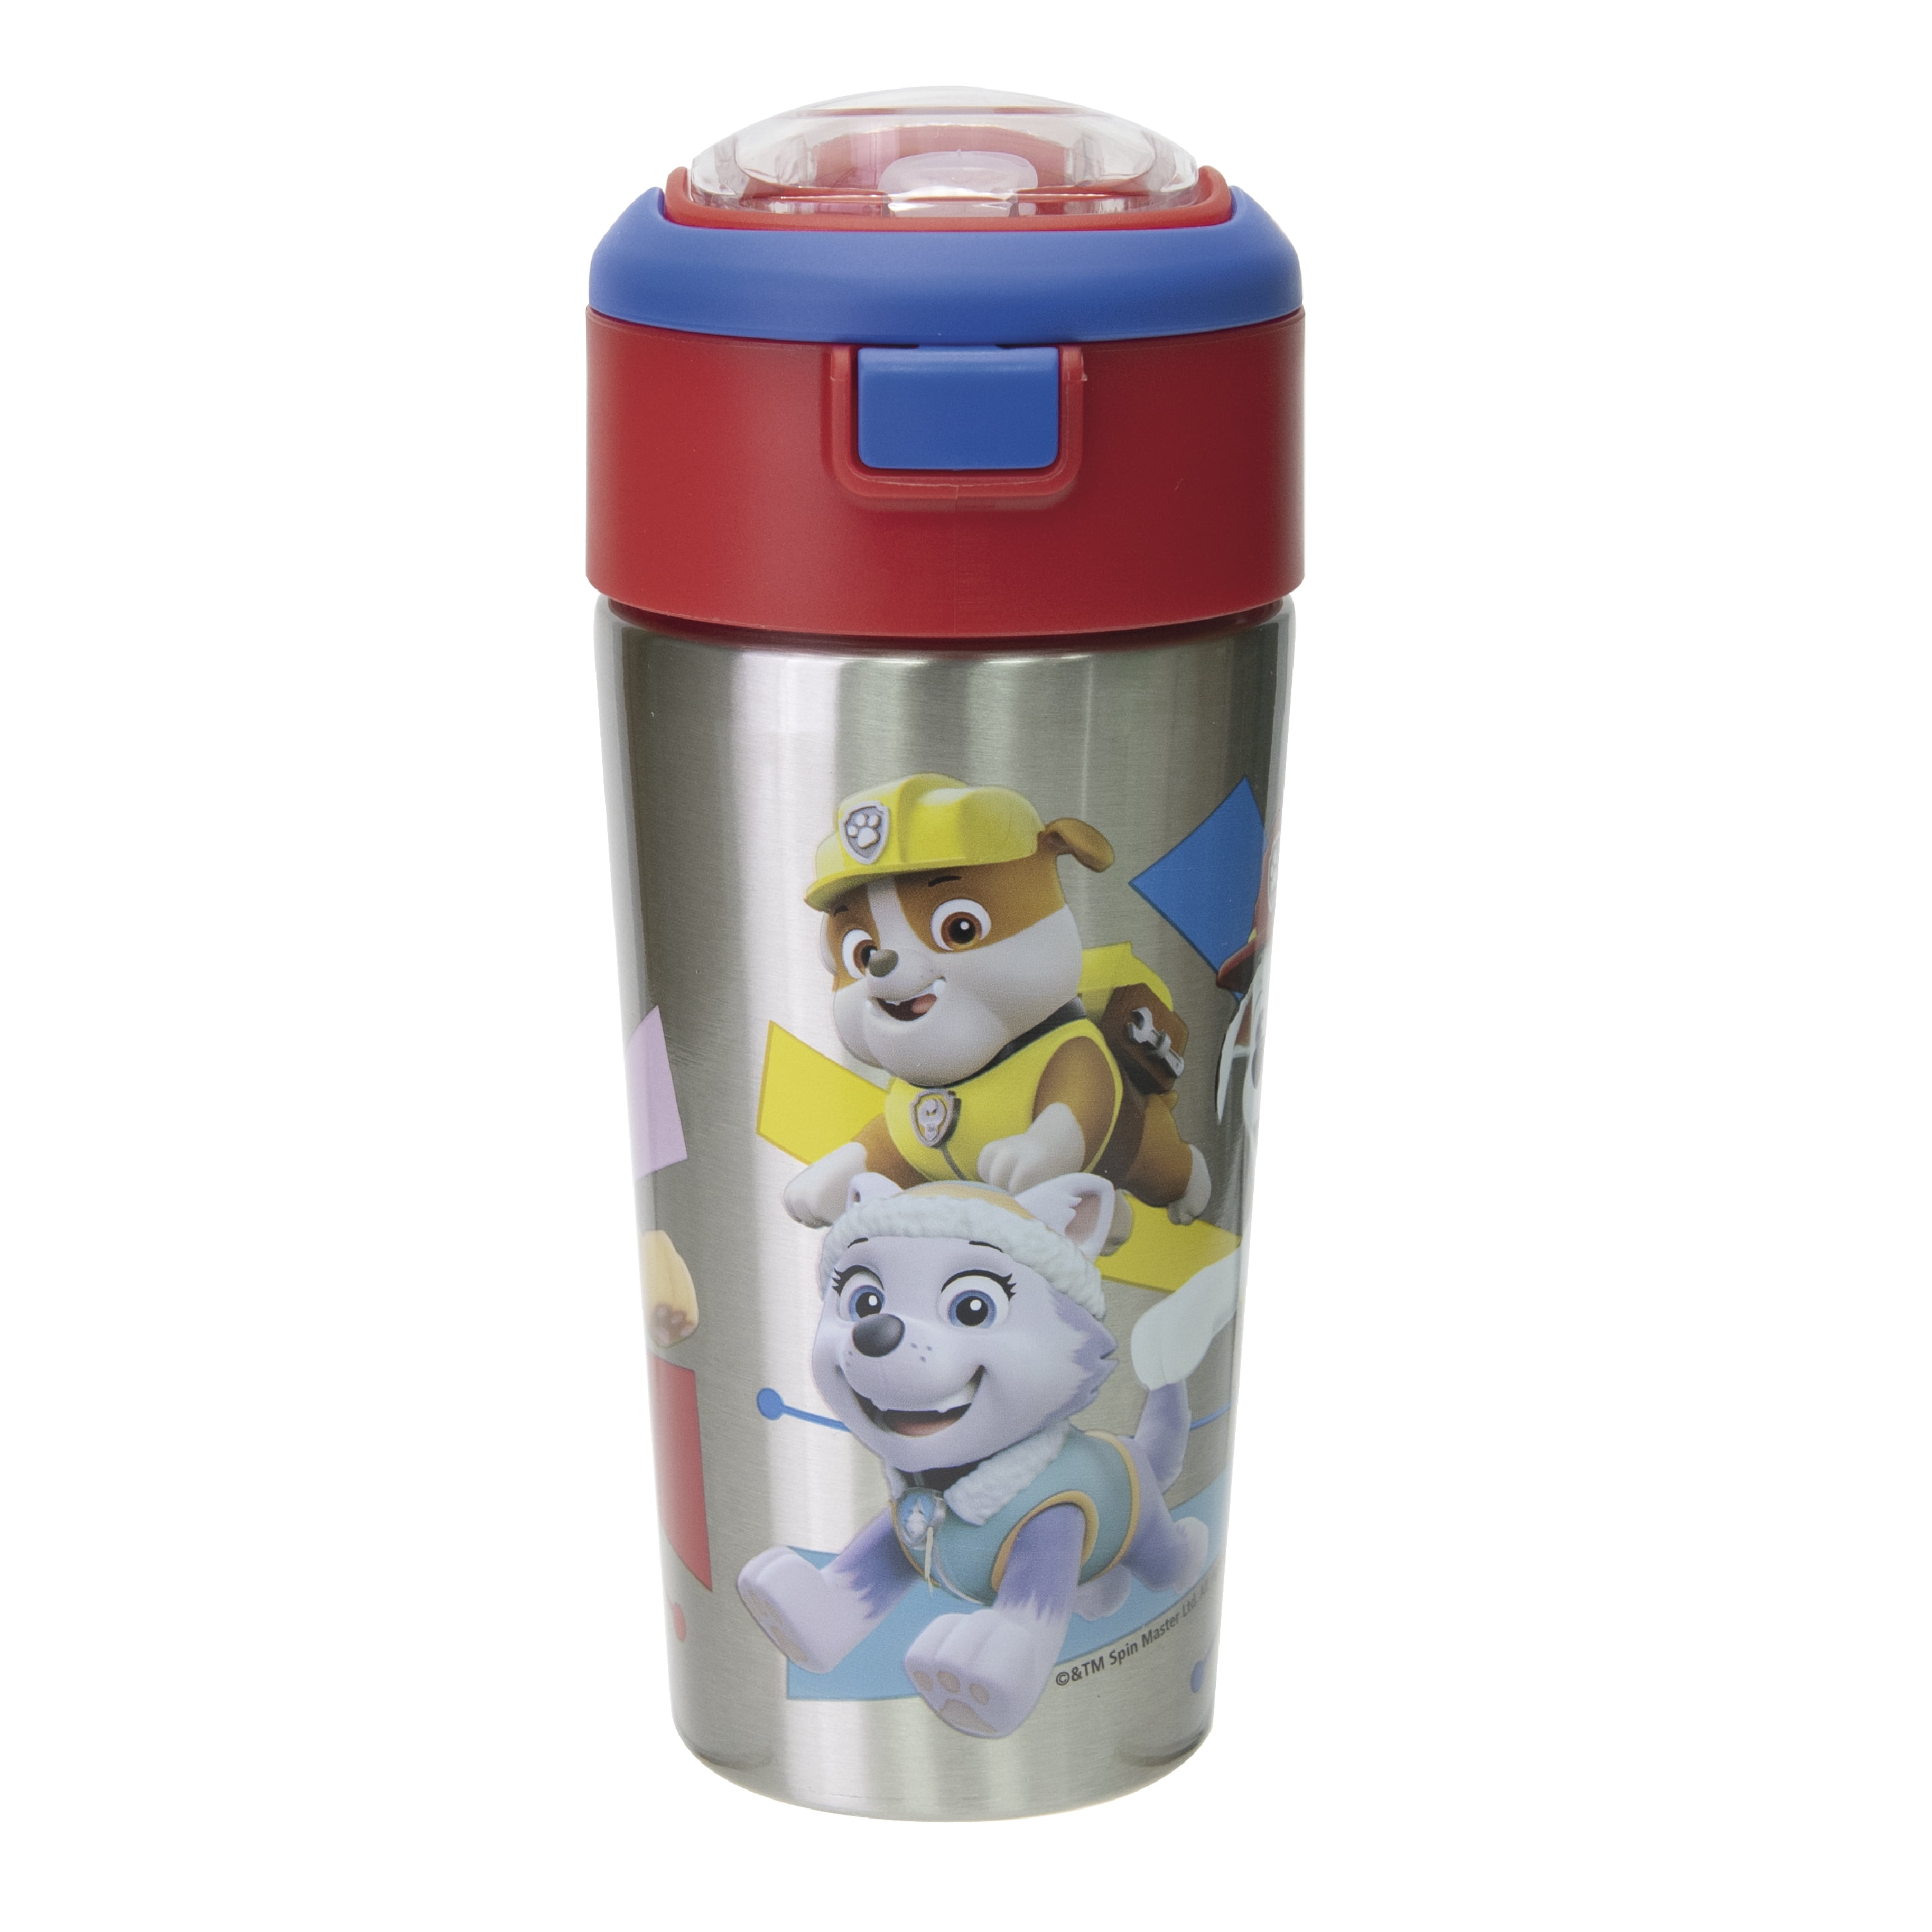 Zak Designs 14oz Stainless Steel Kids' Water Bottle with Antimicrobial Spout 'Zaksaurus